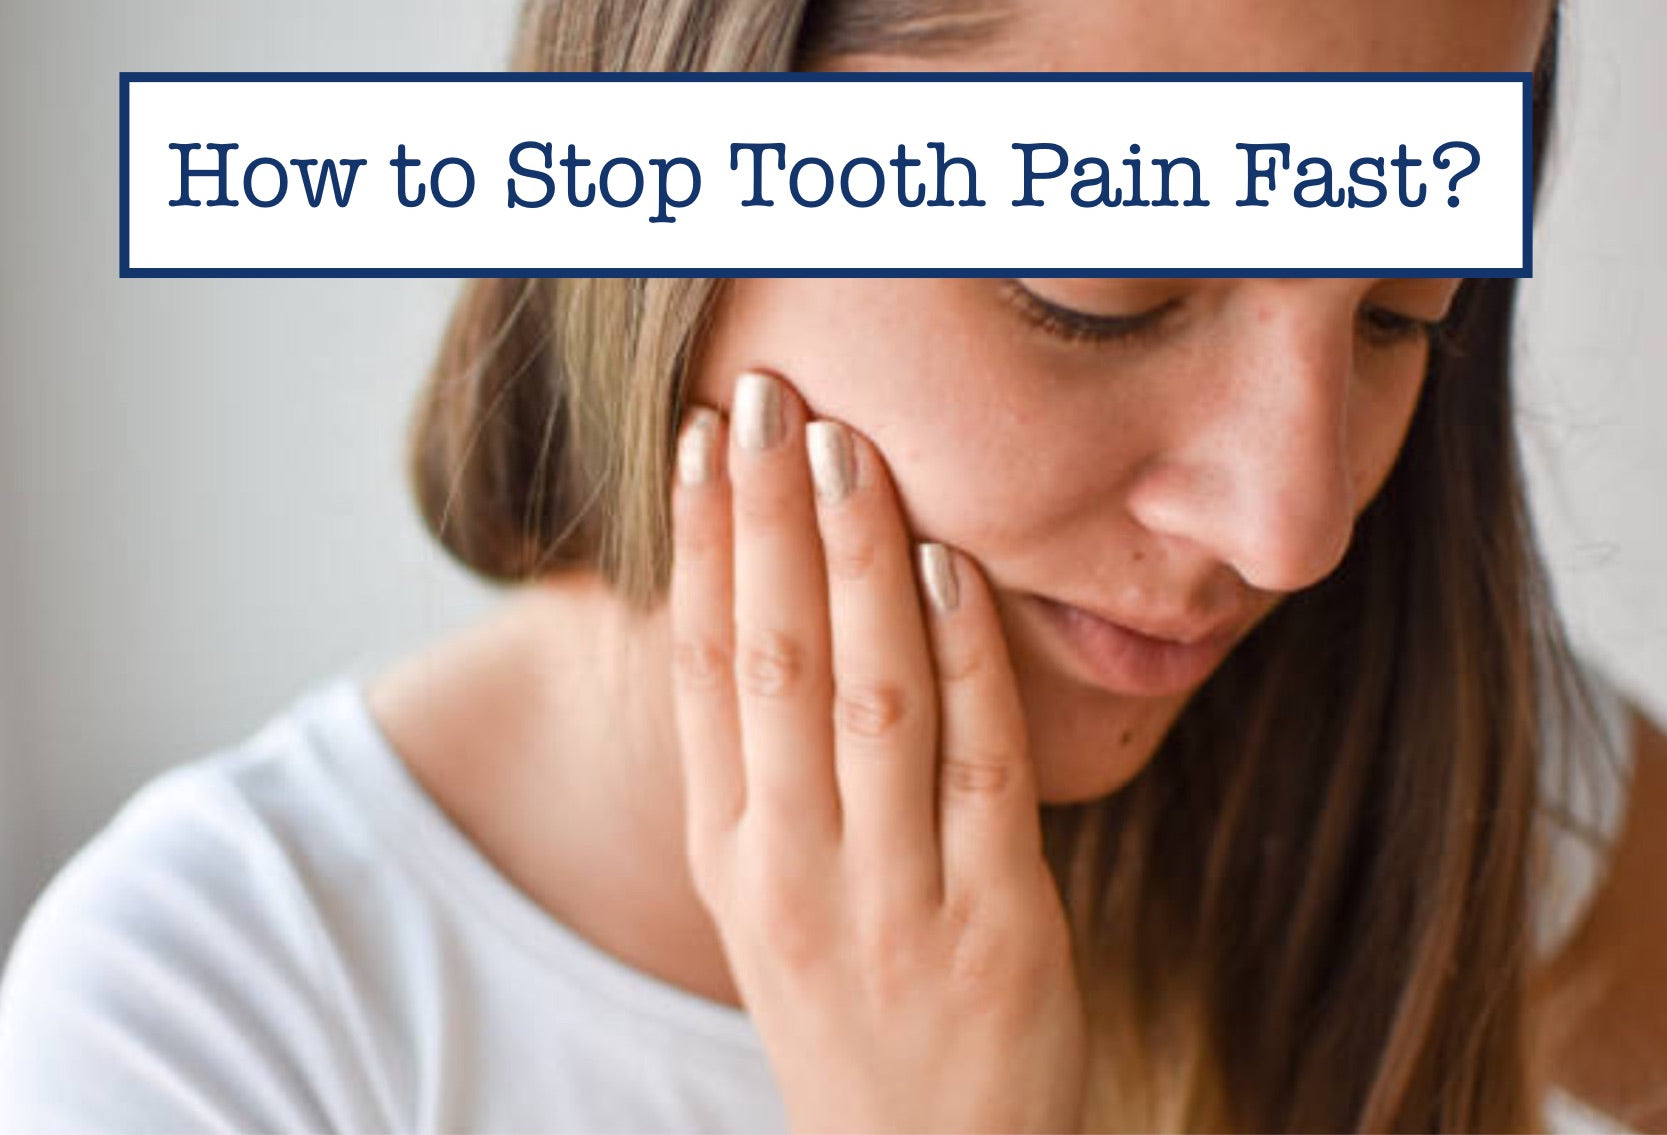 How to Stop Tooth Pain Fast?